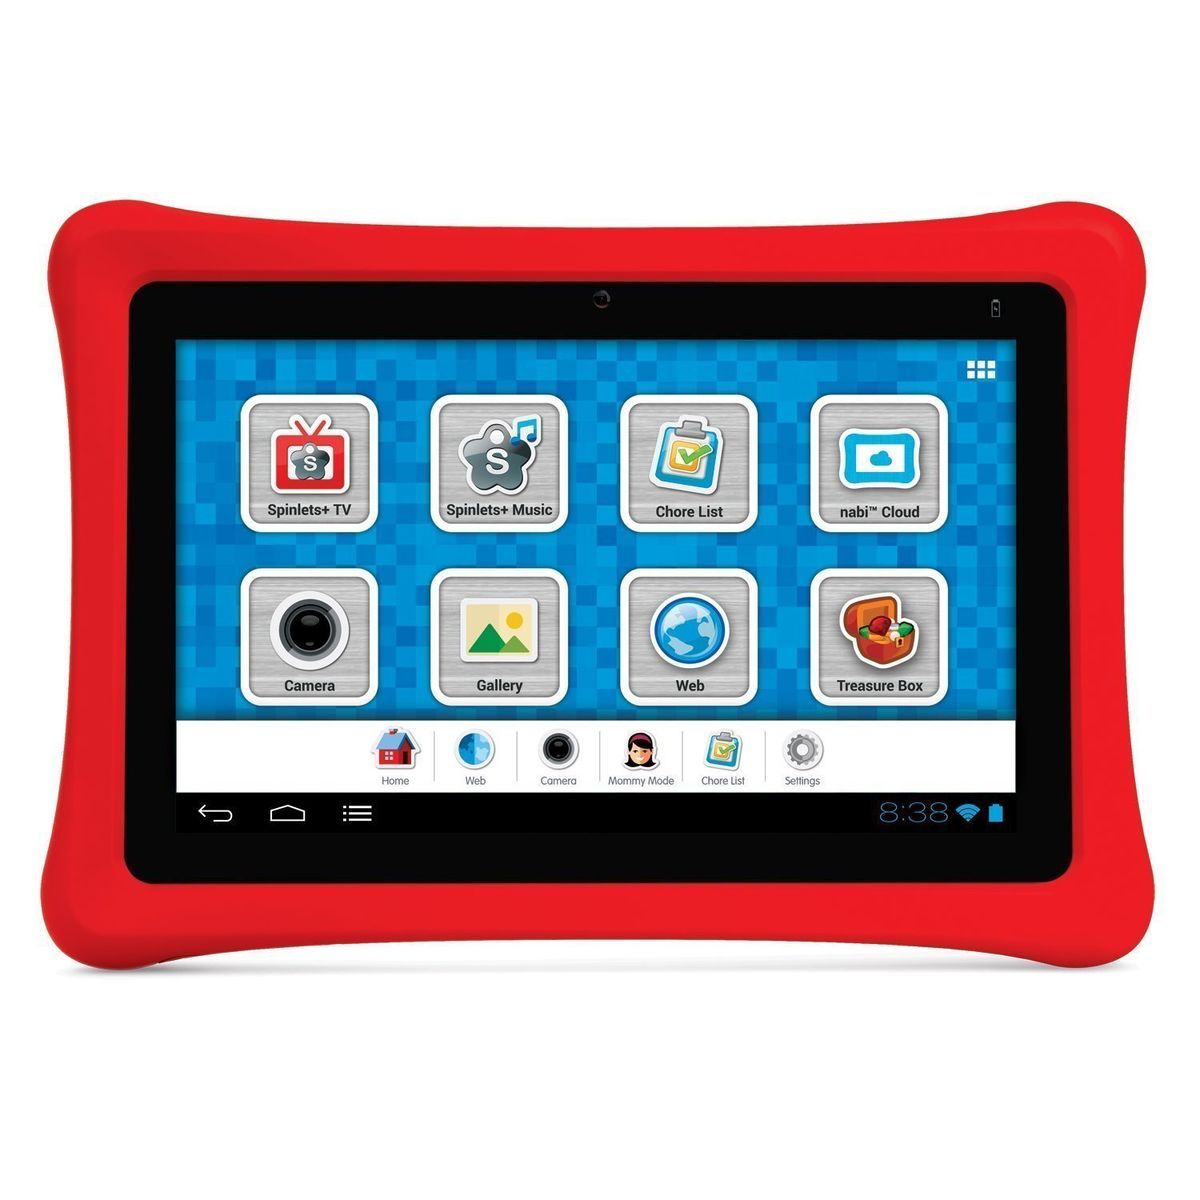 New Fuhu Nabi NABI2 NV7A 7 inch Kids Touchscreen Android Tablet $200